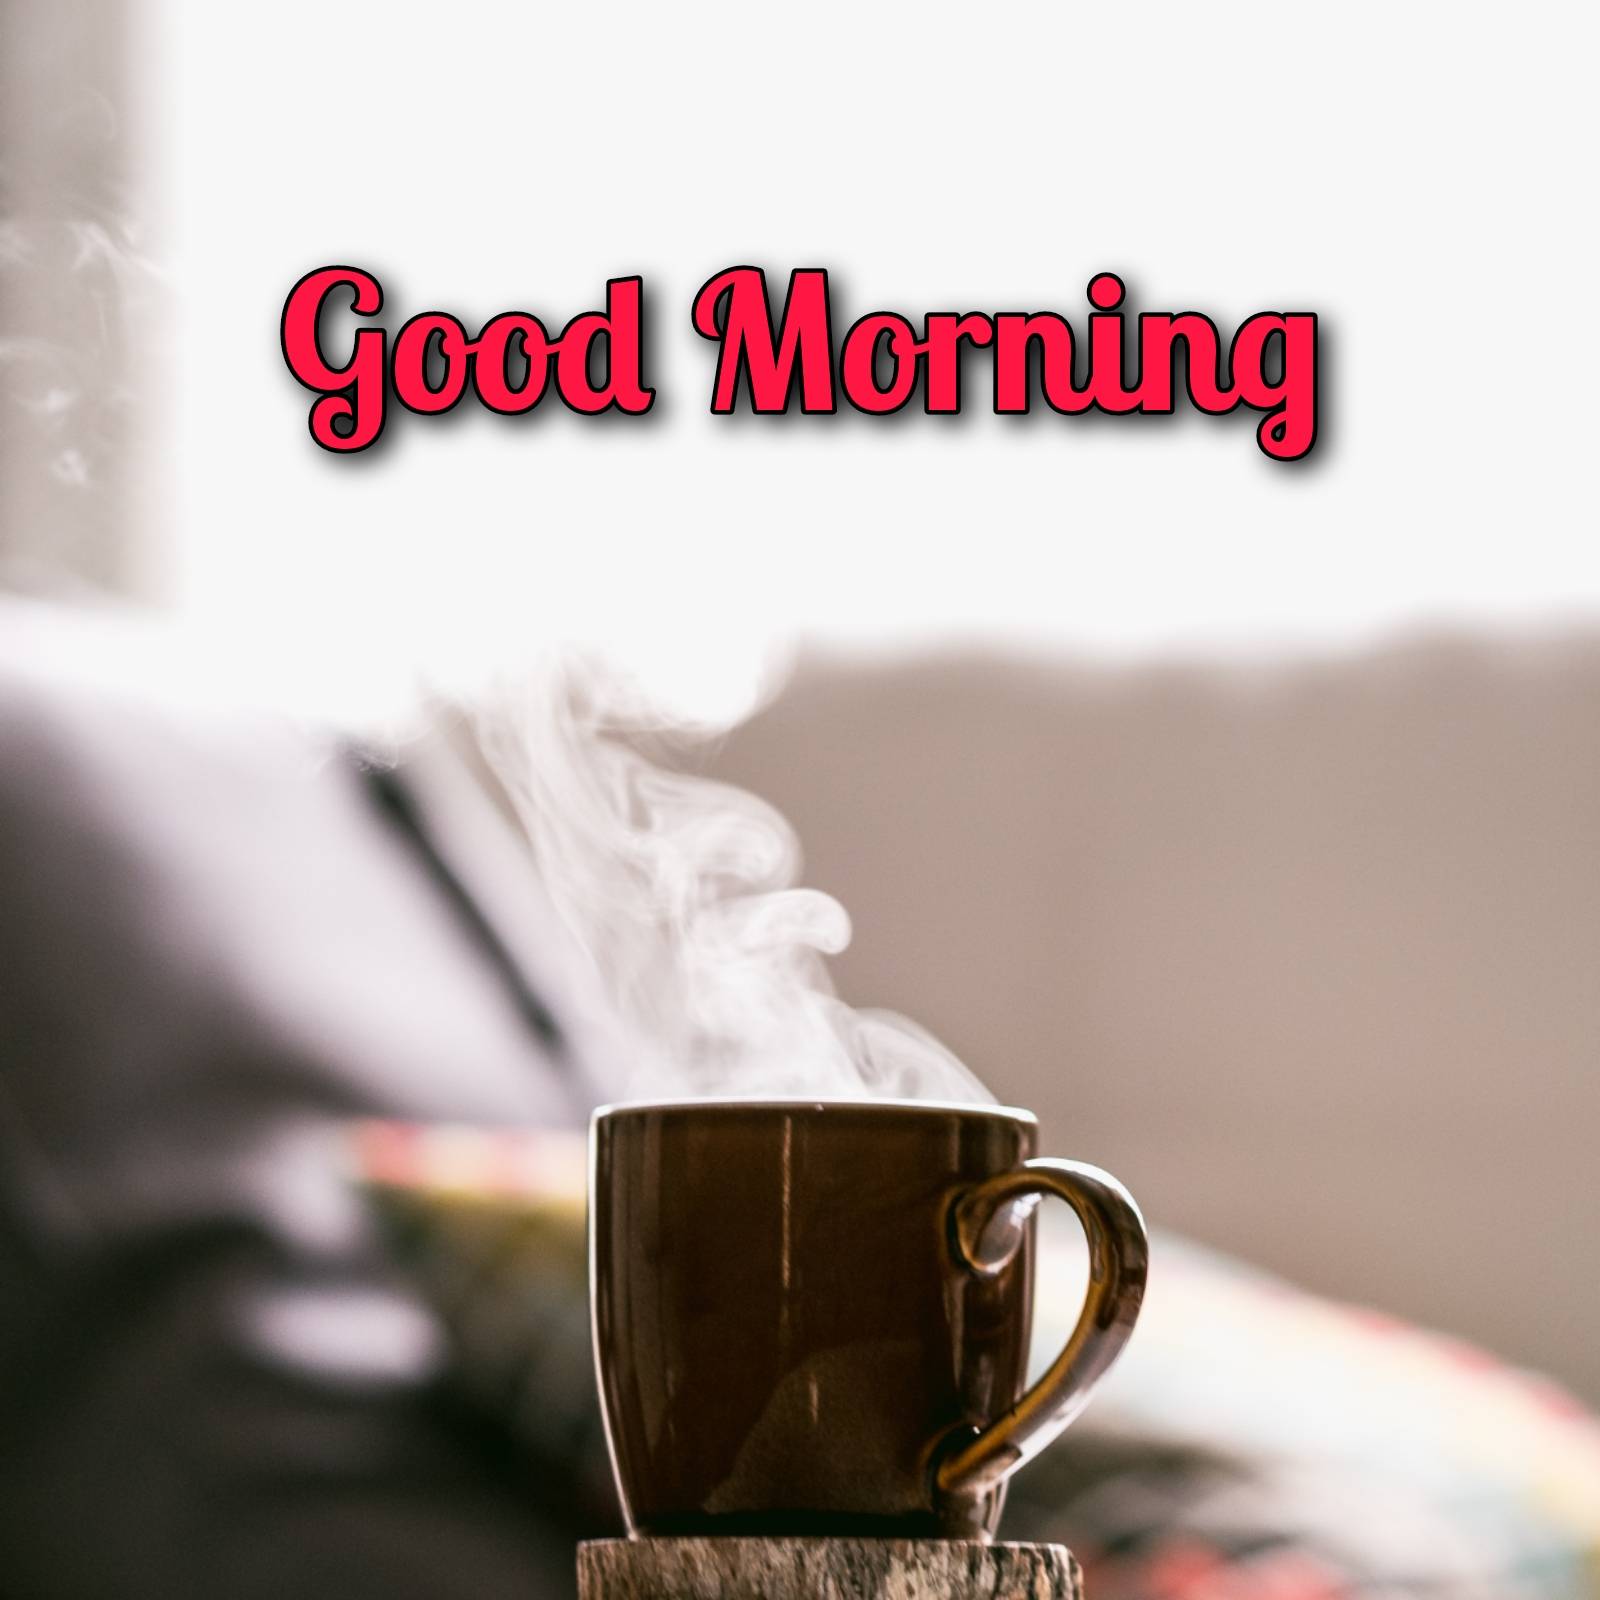 Good Morning Images Hd Coffee